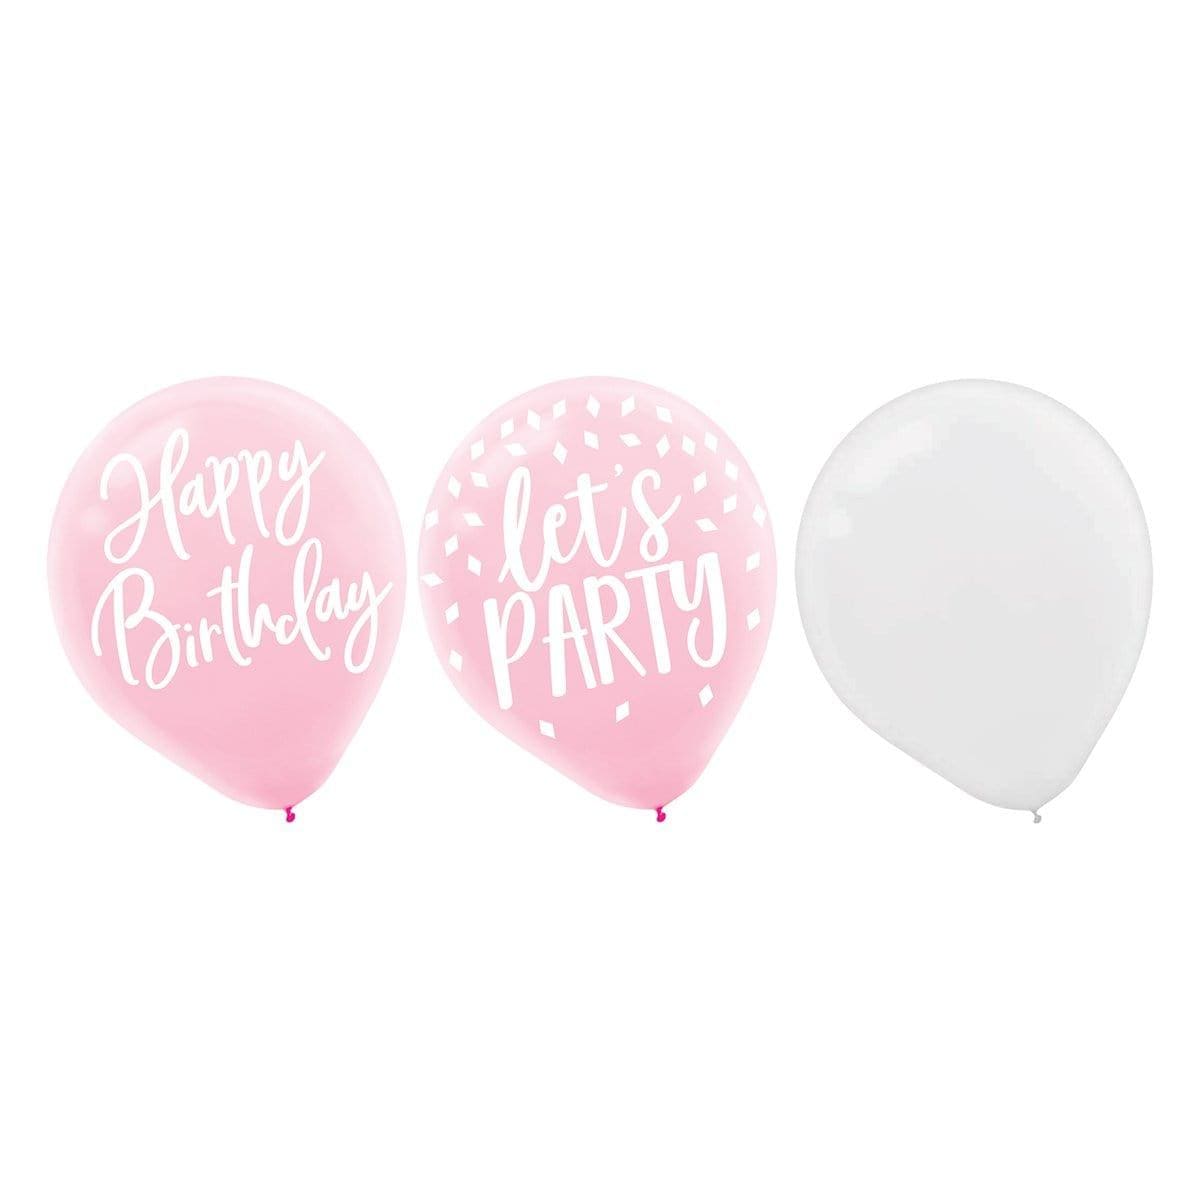 Buy General Birthday Blush Birthday - Latex Balloons 15 count sold at Party Expert